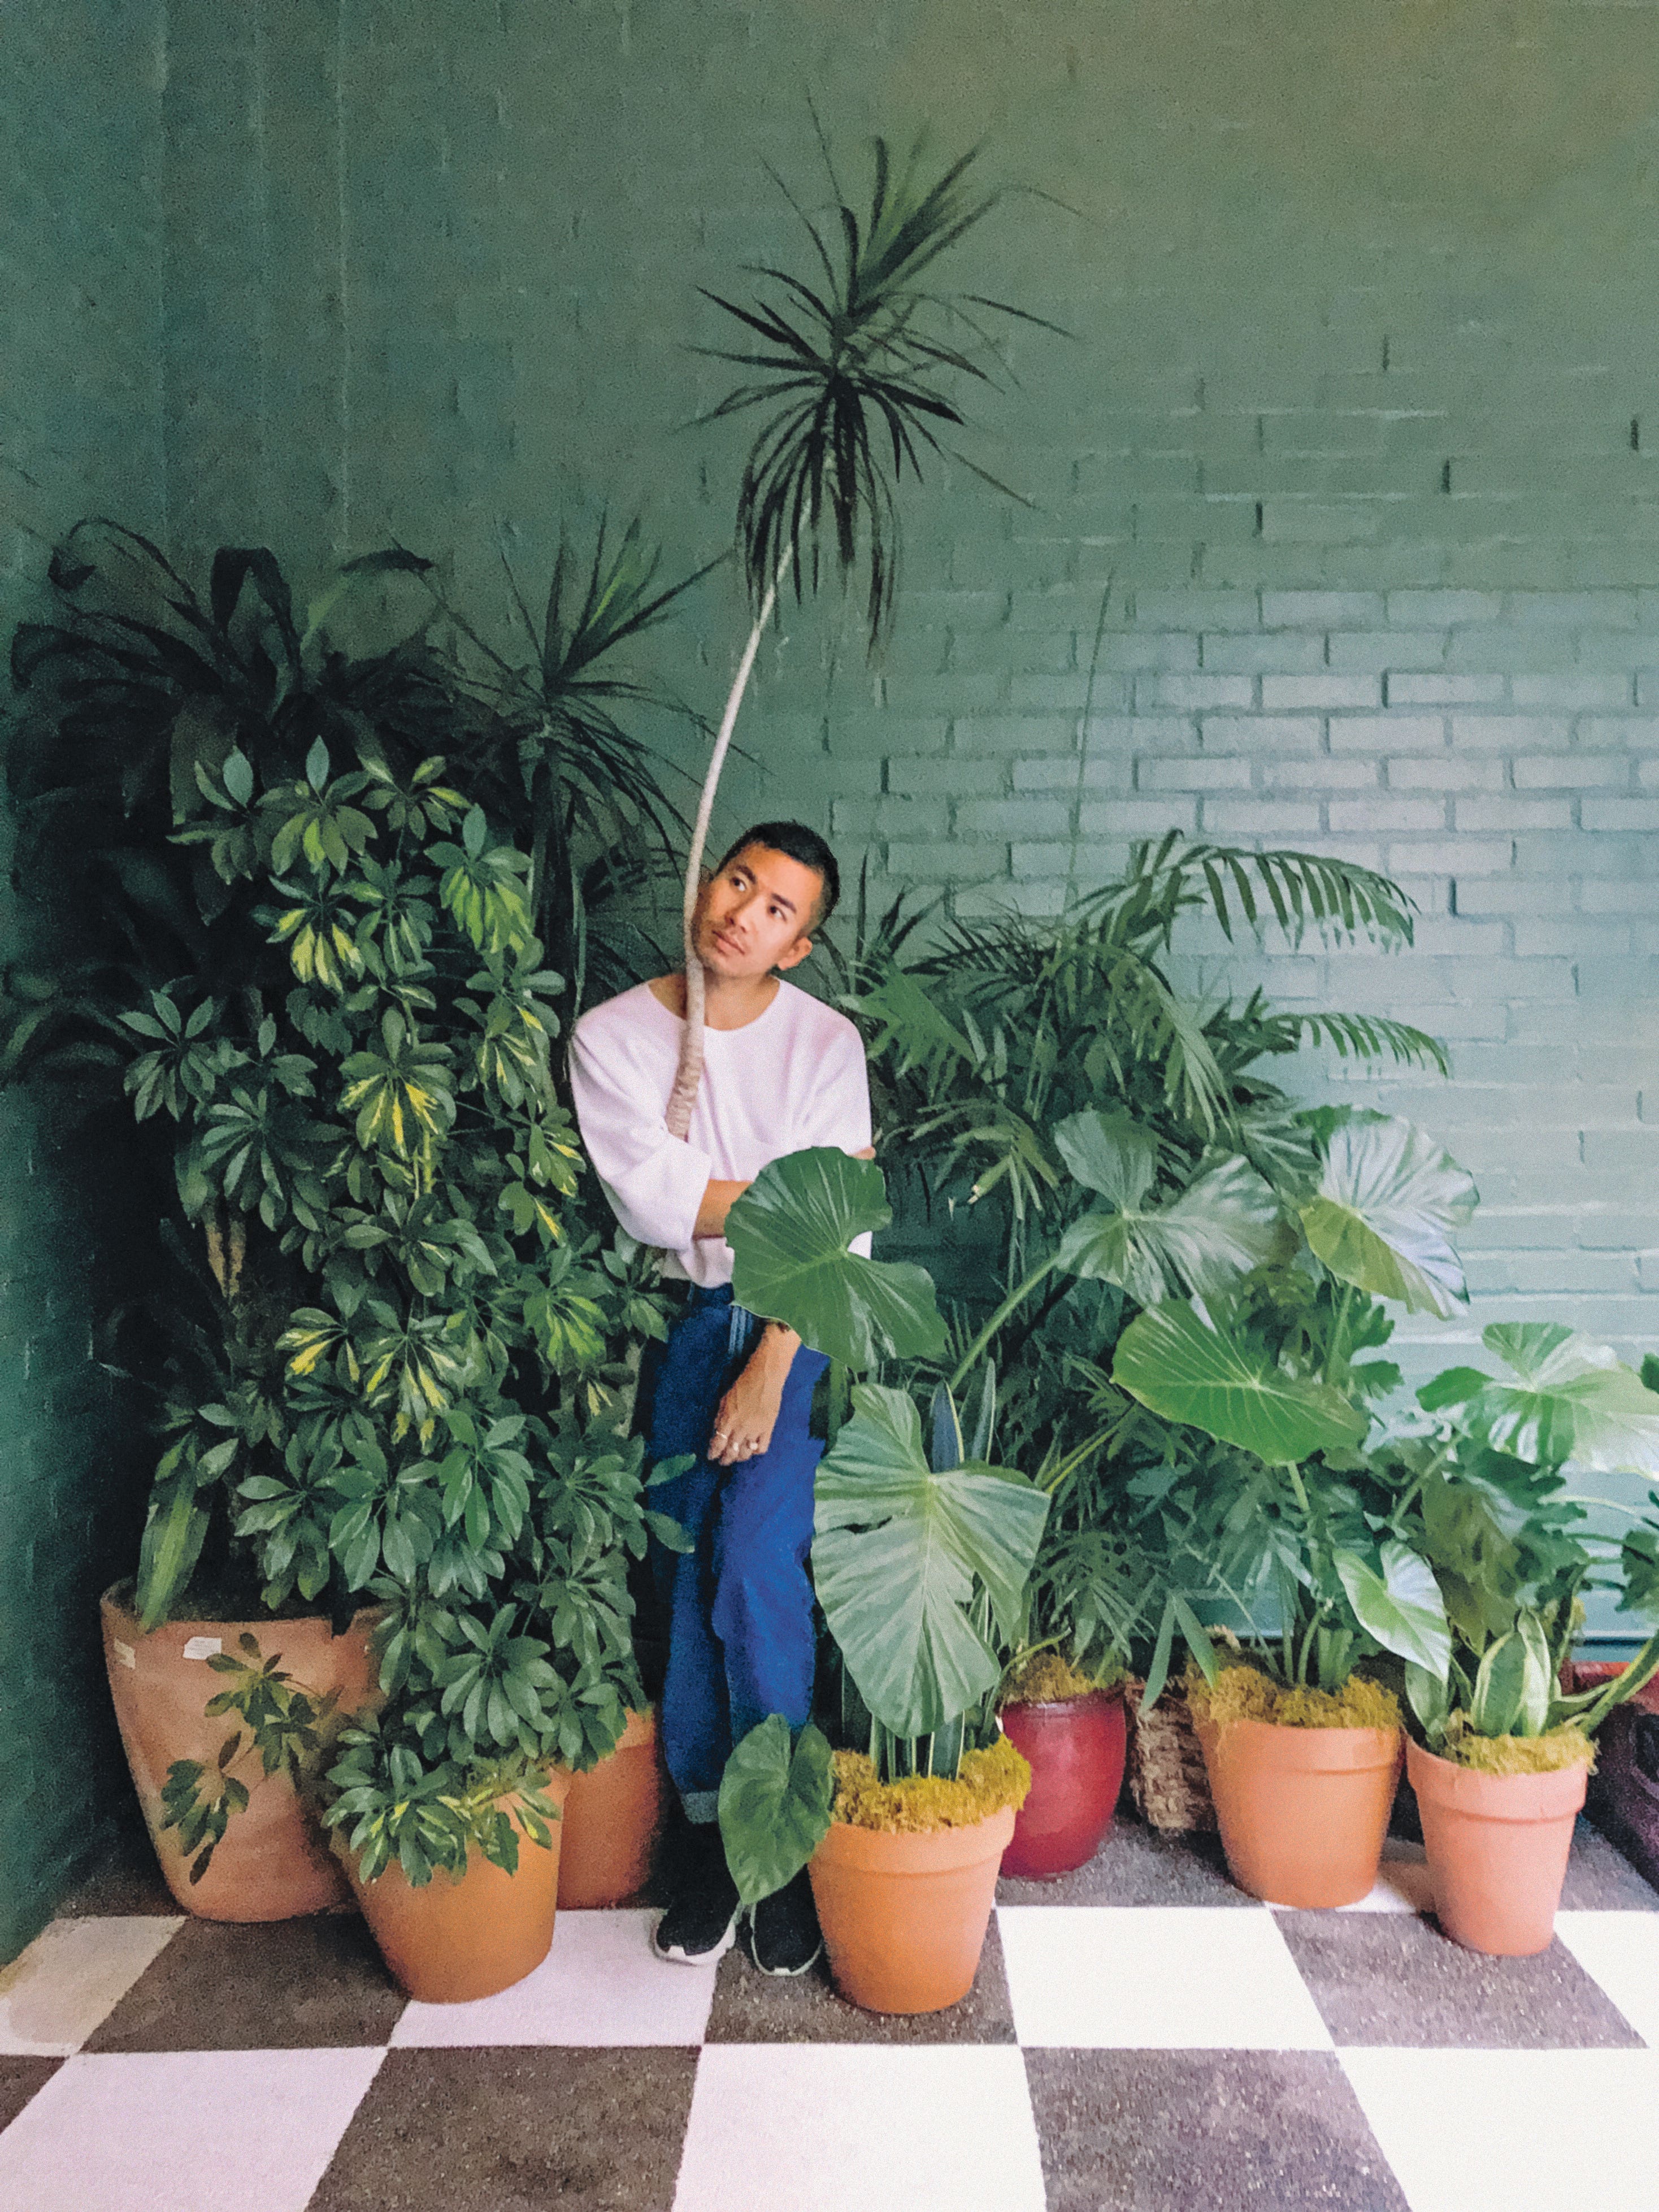 Are Boys With Plants the New “Hot Men Reading”?